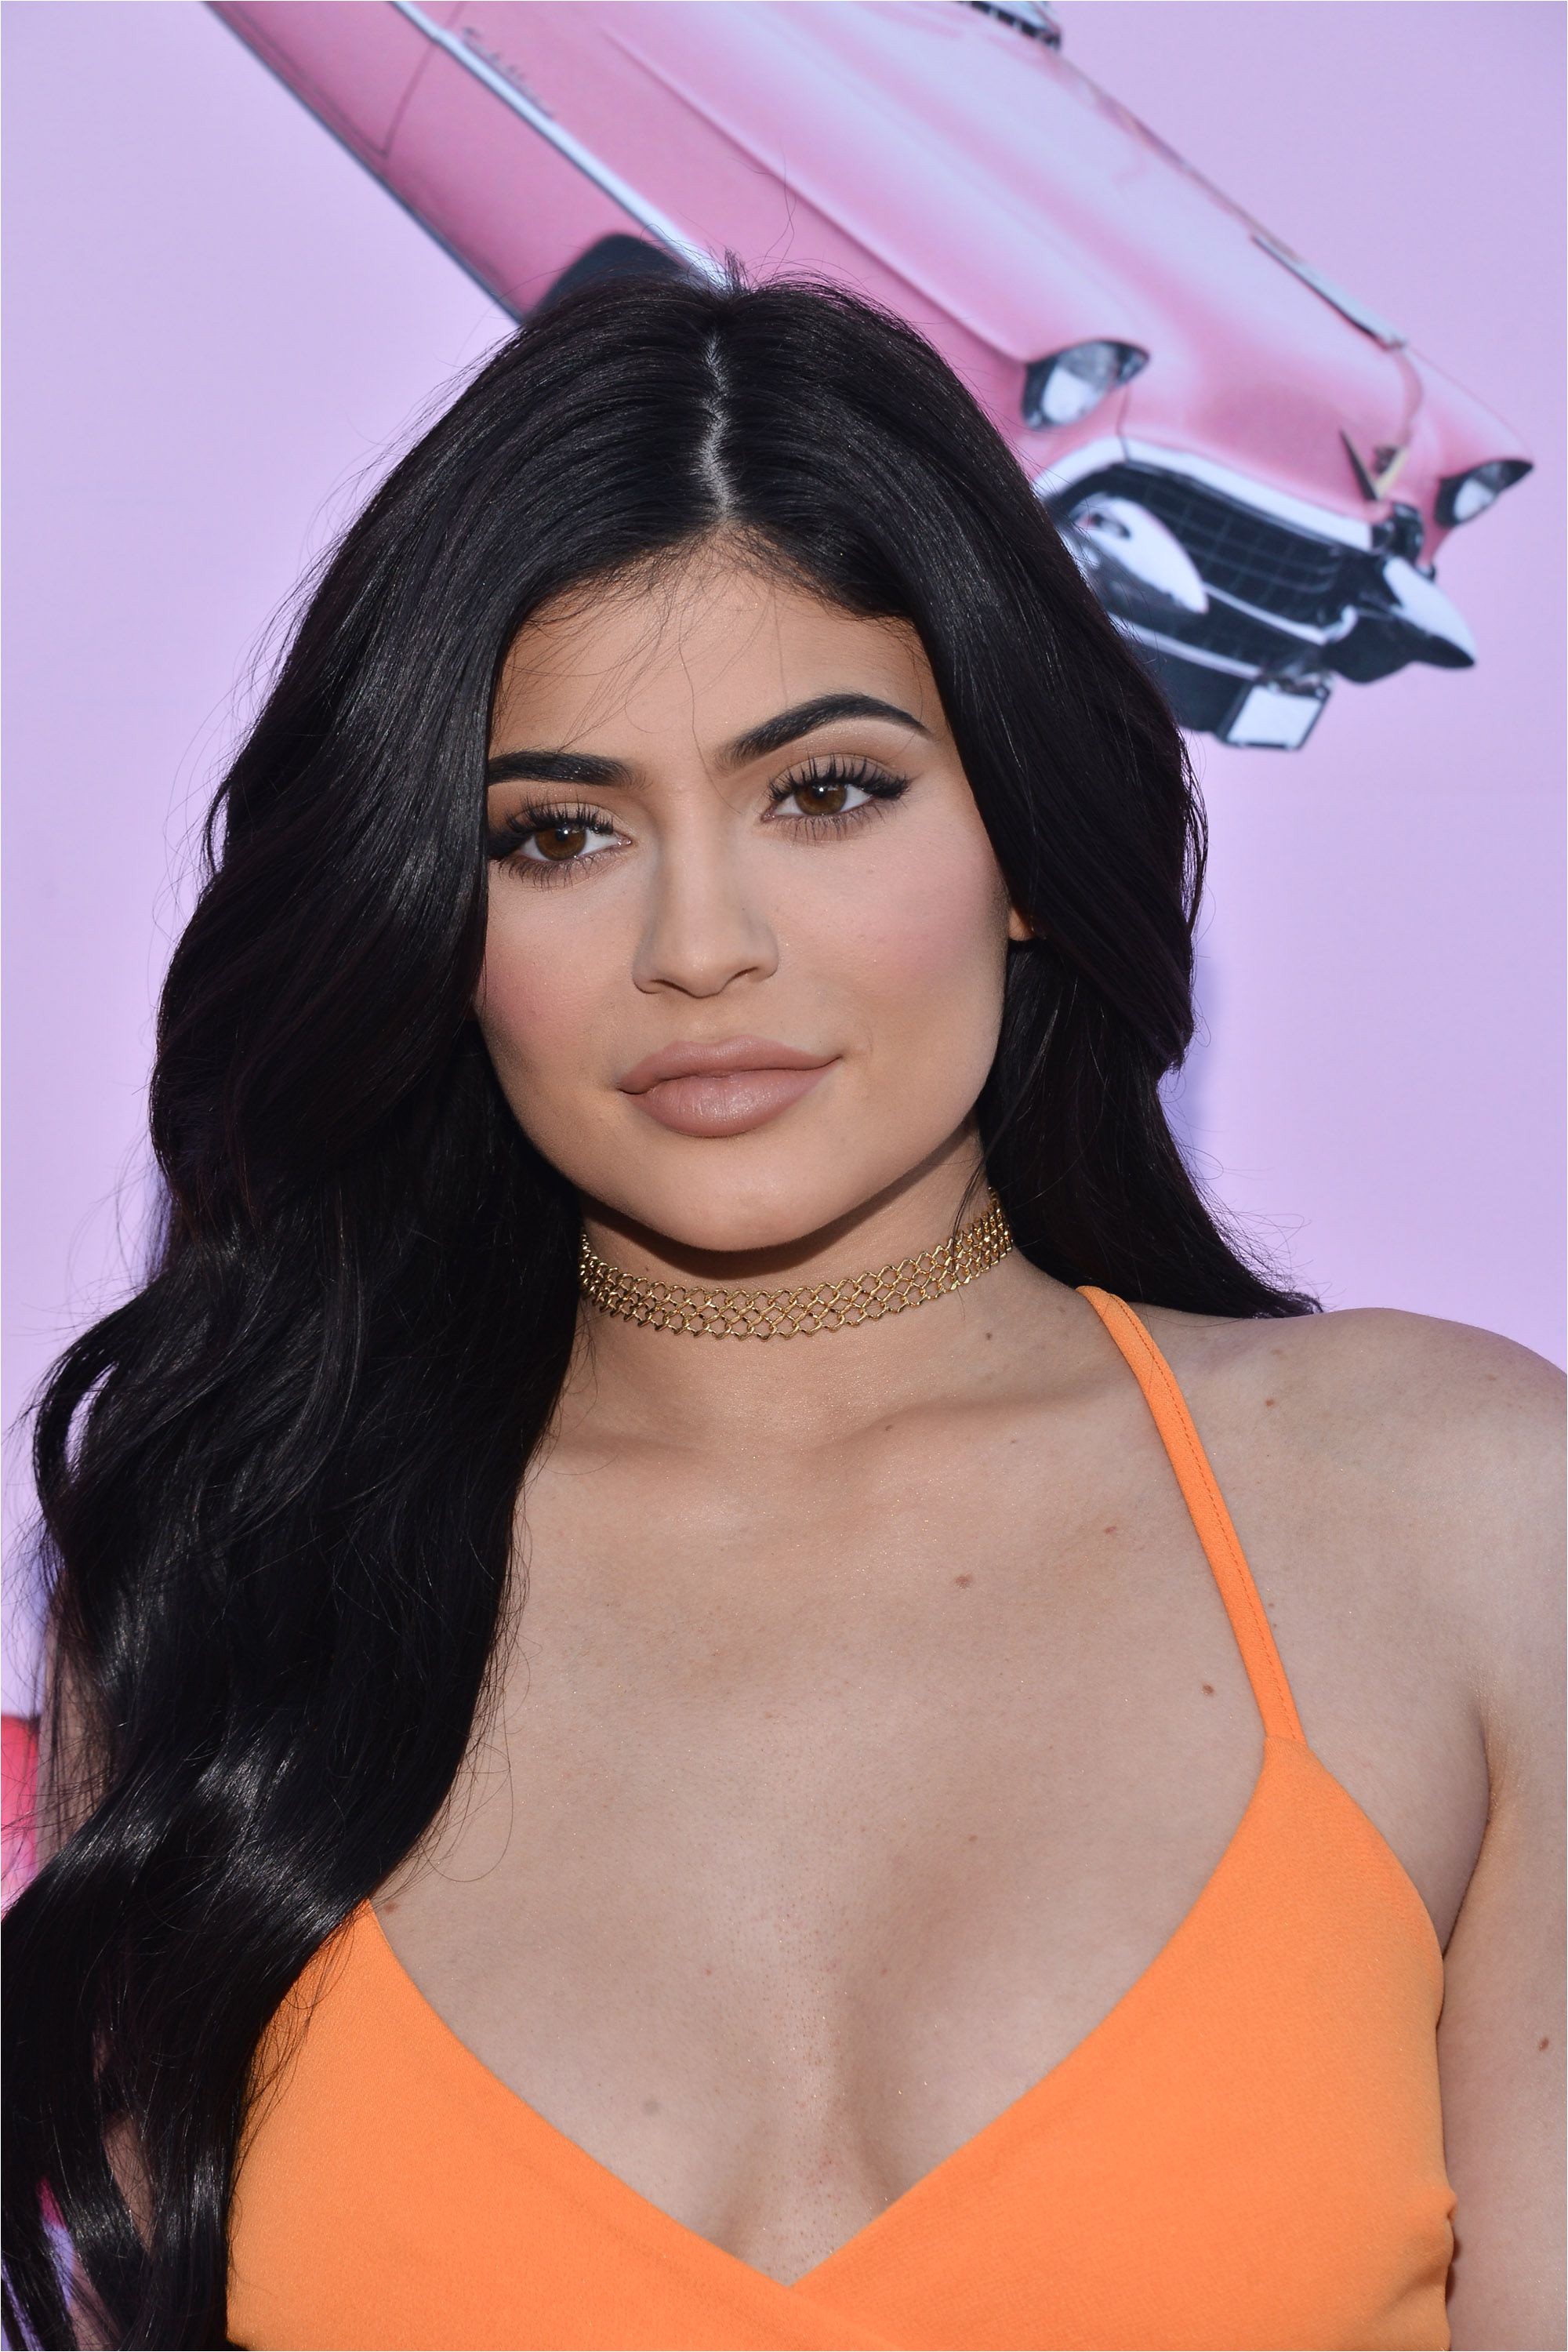 elle kylie jenner hair tyimages 50 Best Kylie Jenner Hair Looks The Best Hairstyles of Kylie Jenner from 10 Year Old Black Girl